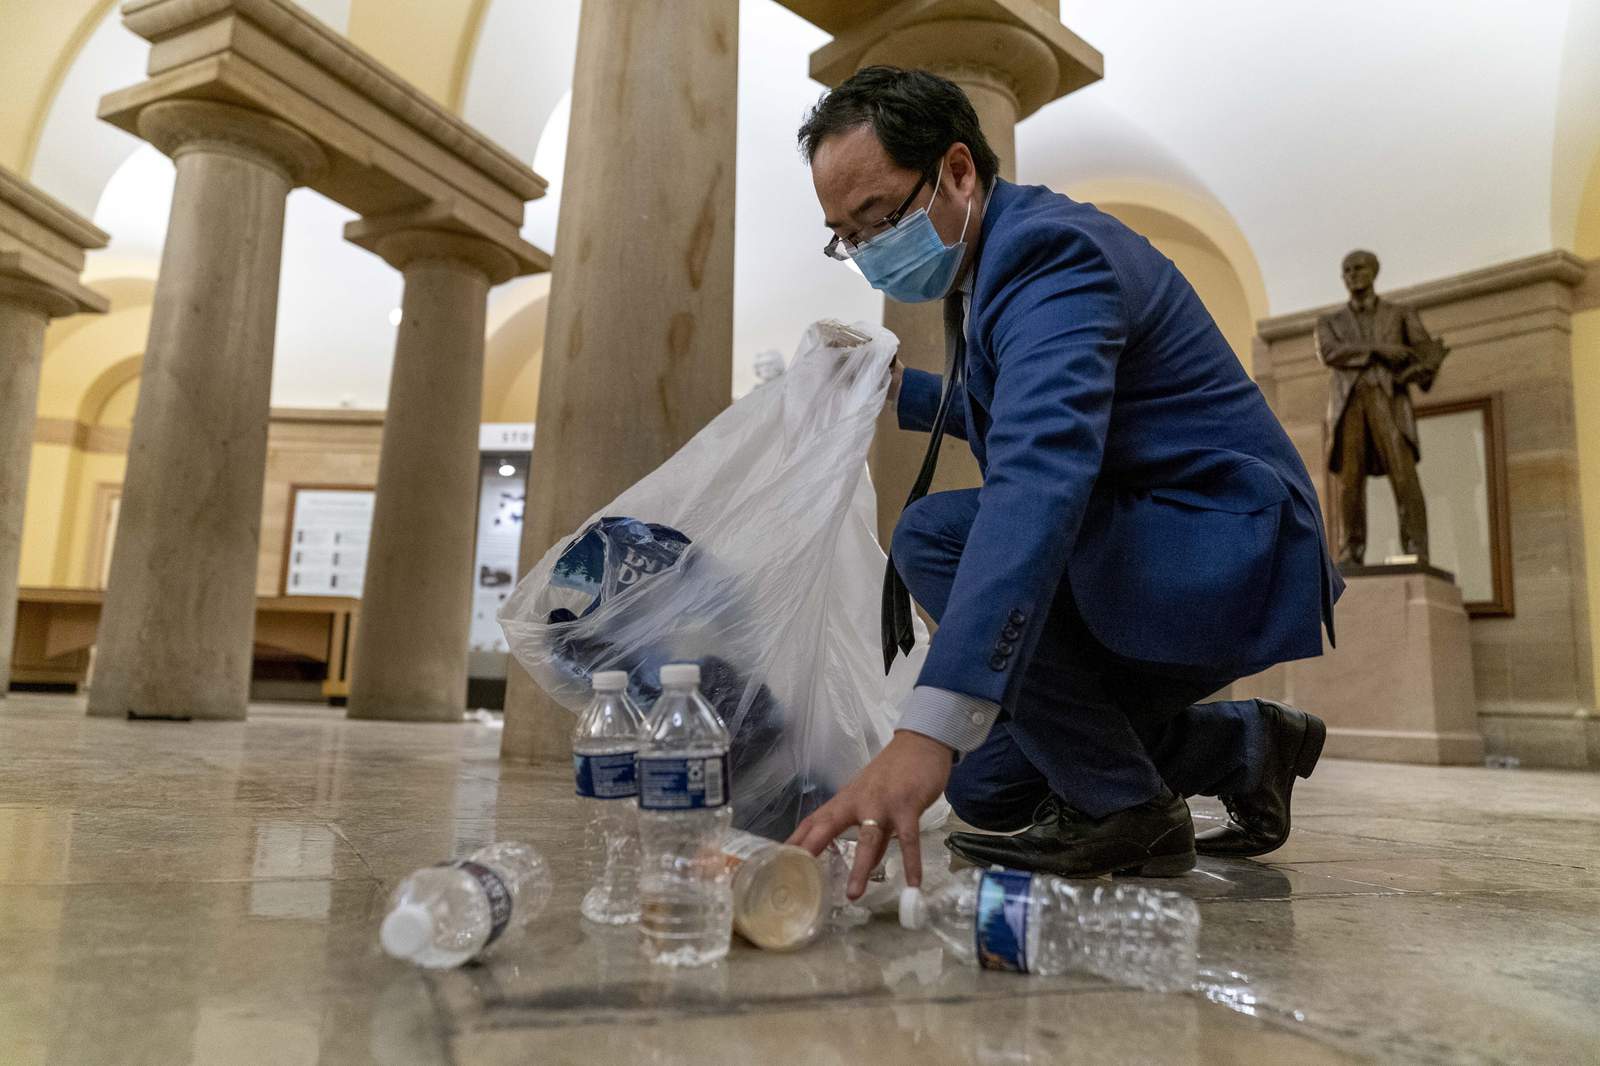 'What else could I do?' NJ Rep. Kim helps clean up Capitol